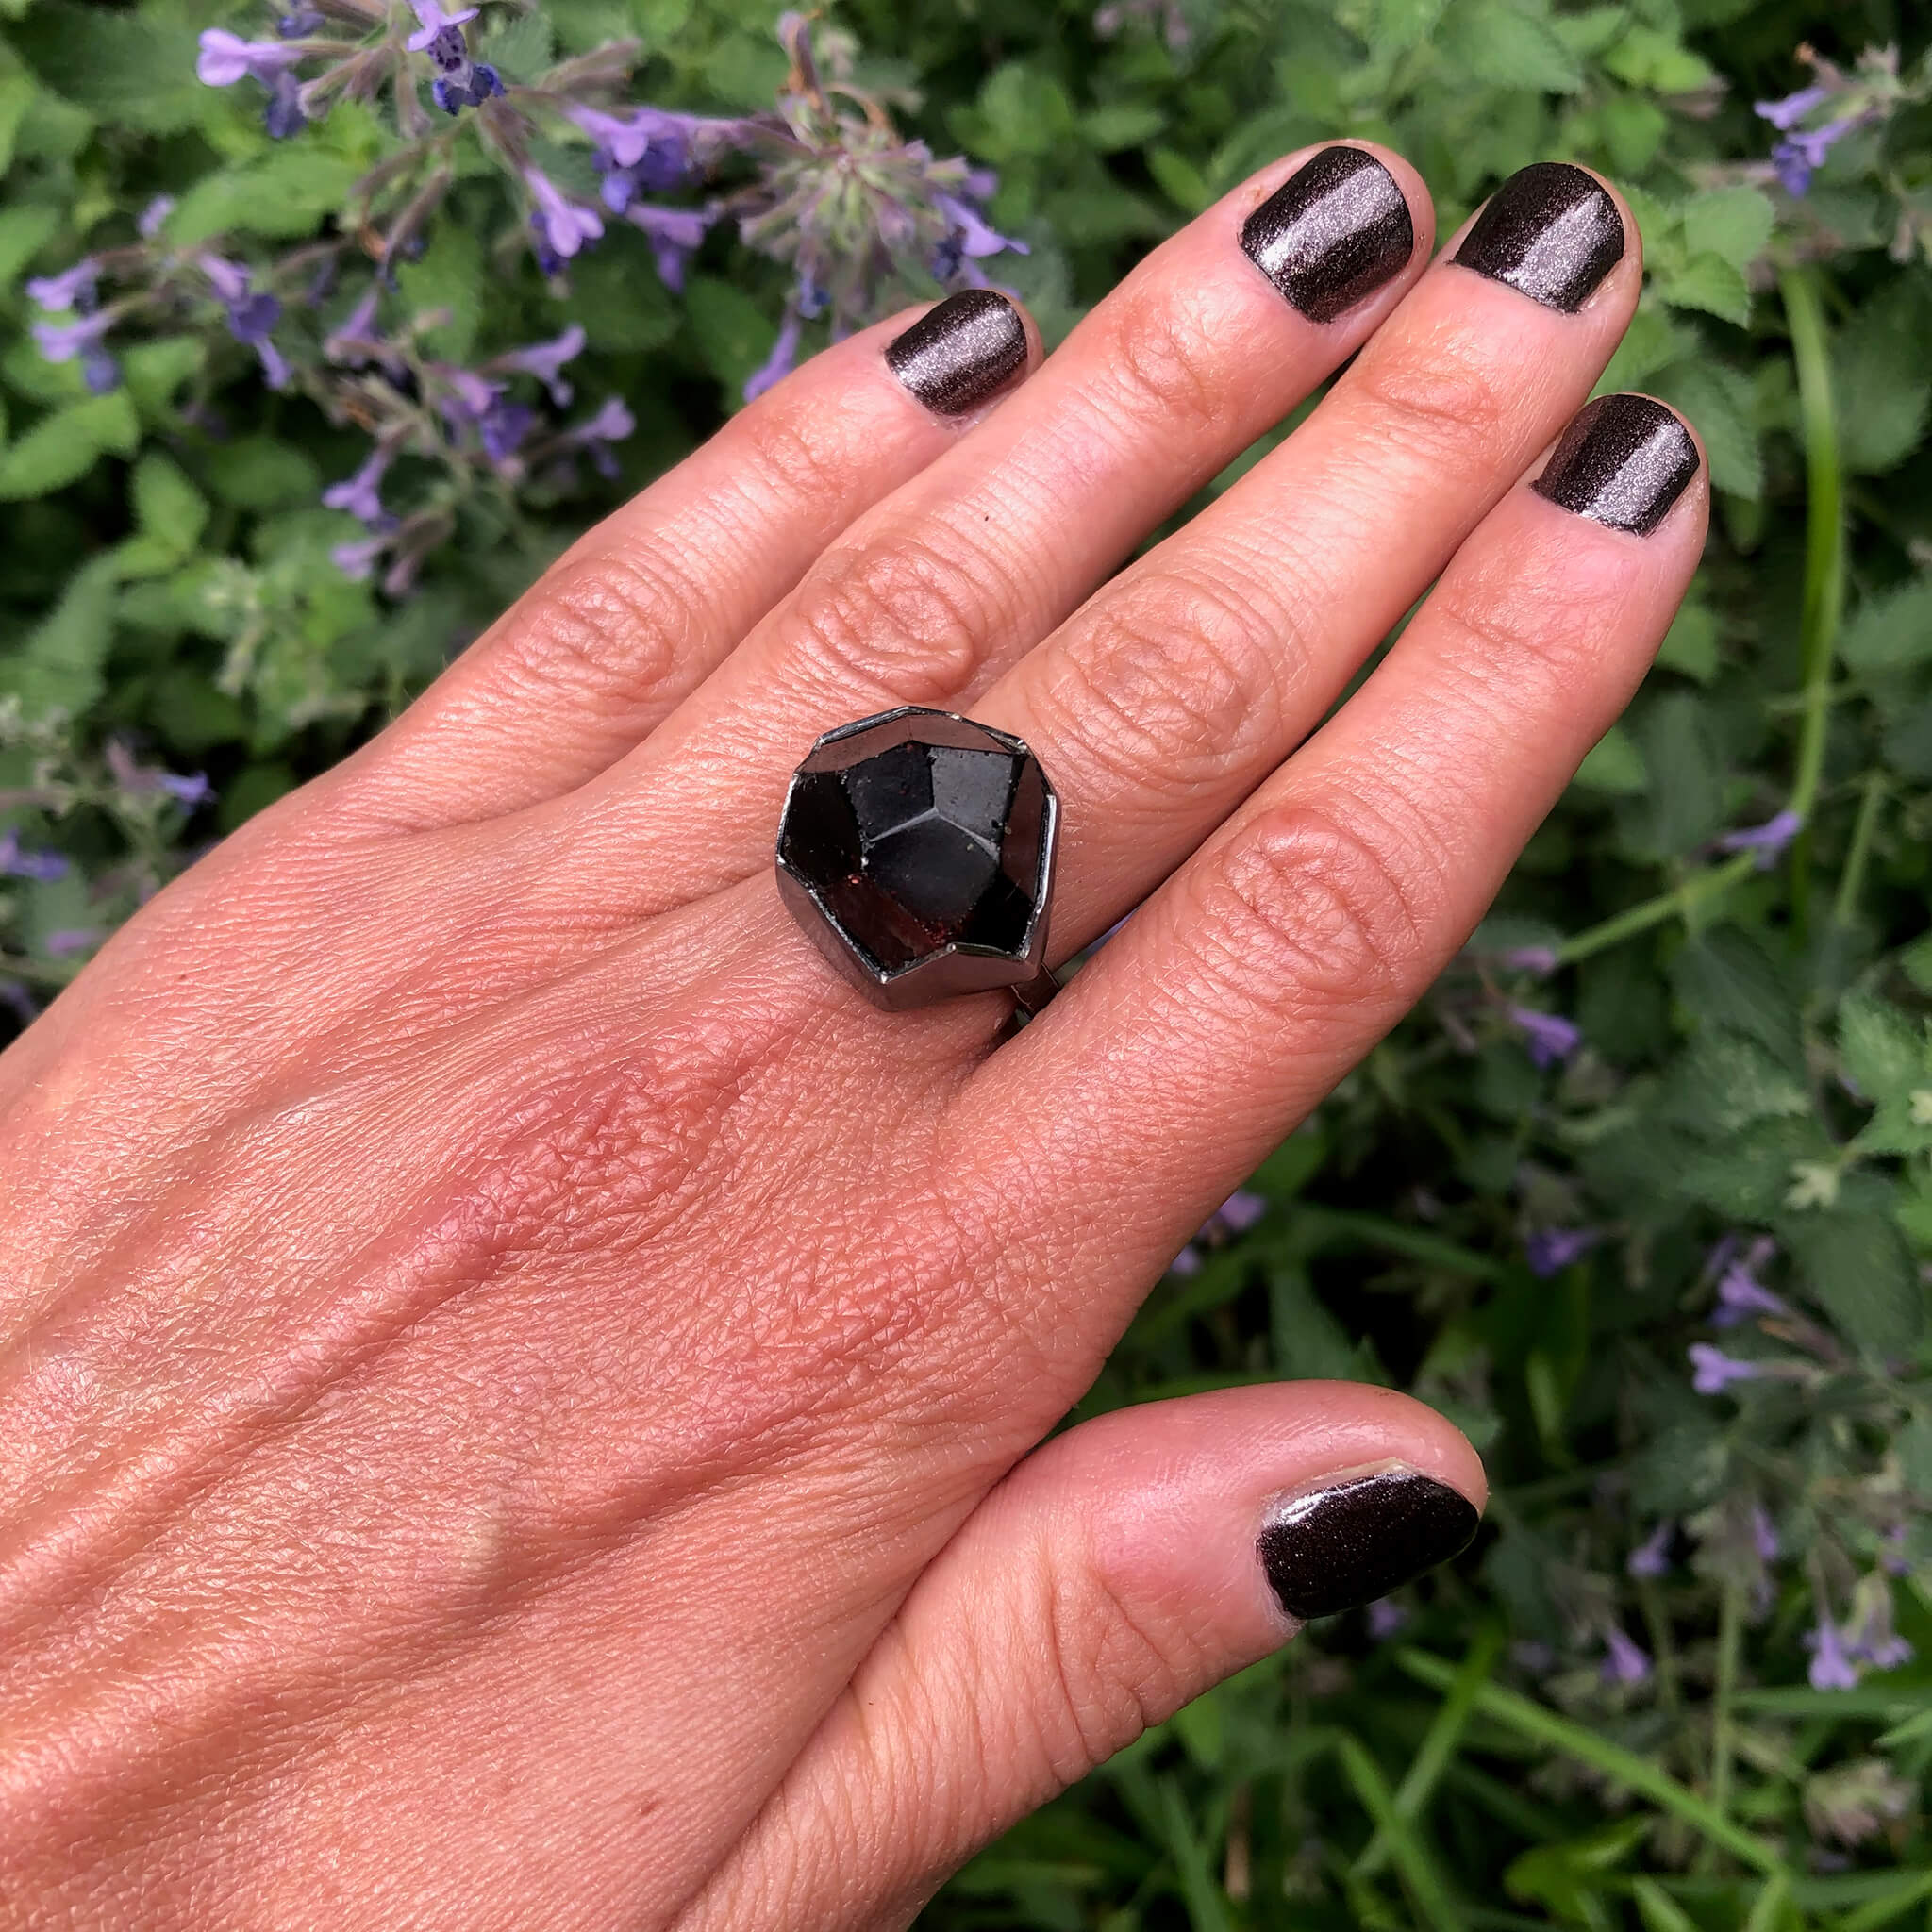 Geometric Garnet Crystal Ring. Set in Oxidized sterling silver. "Betwixt + Between" collection by Alex Lozier Jewelry + Salicrow.